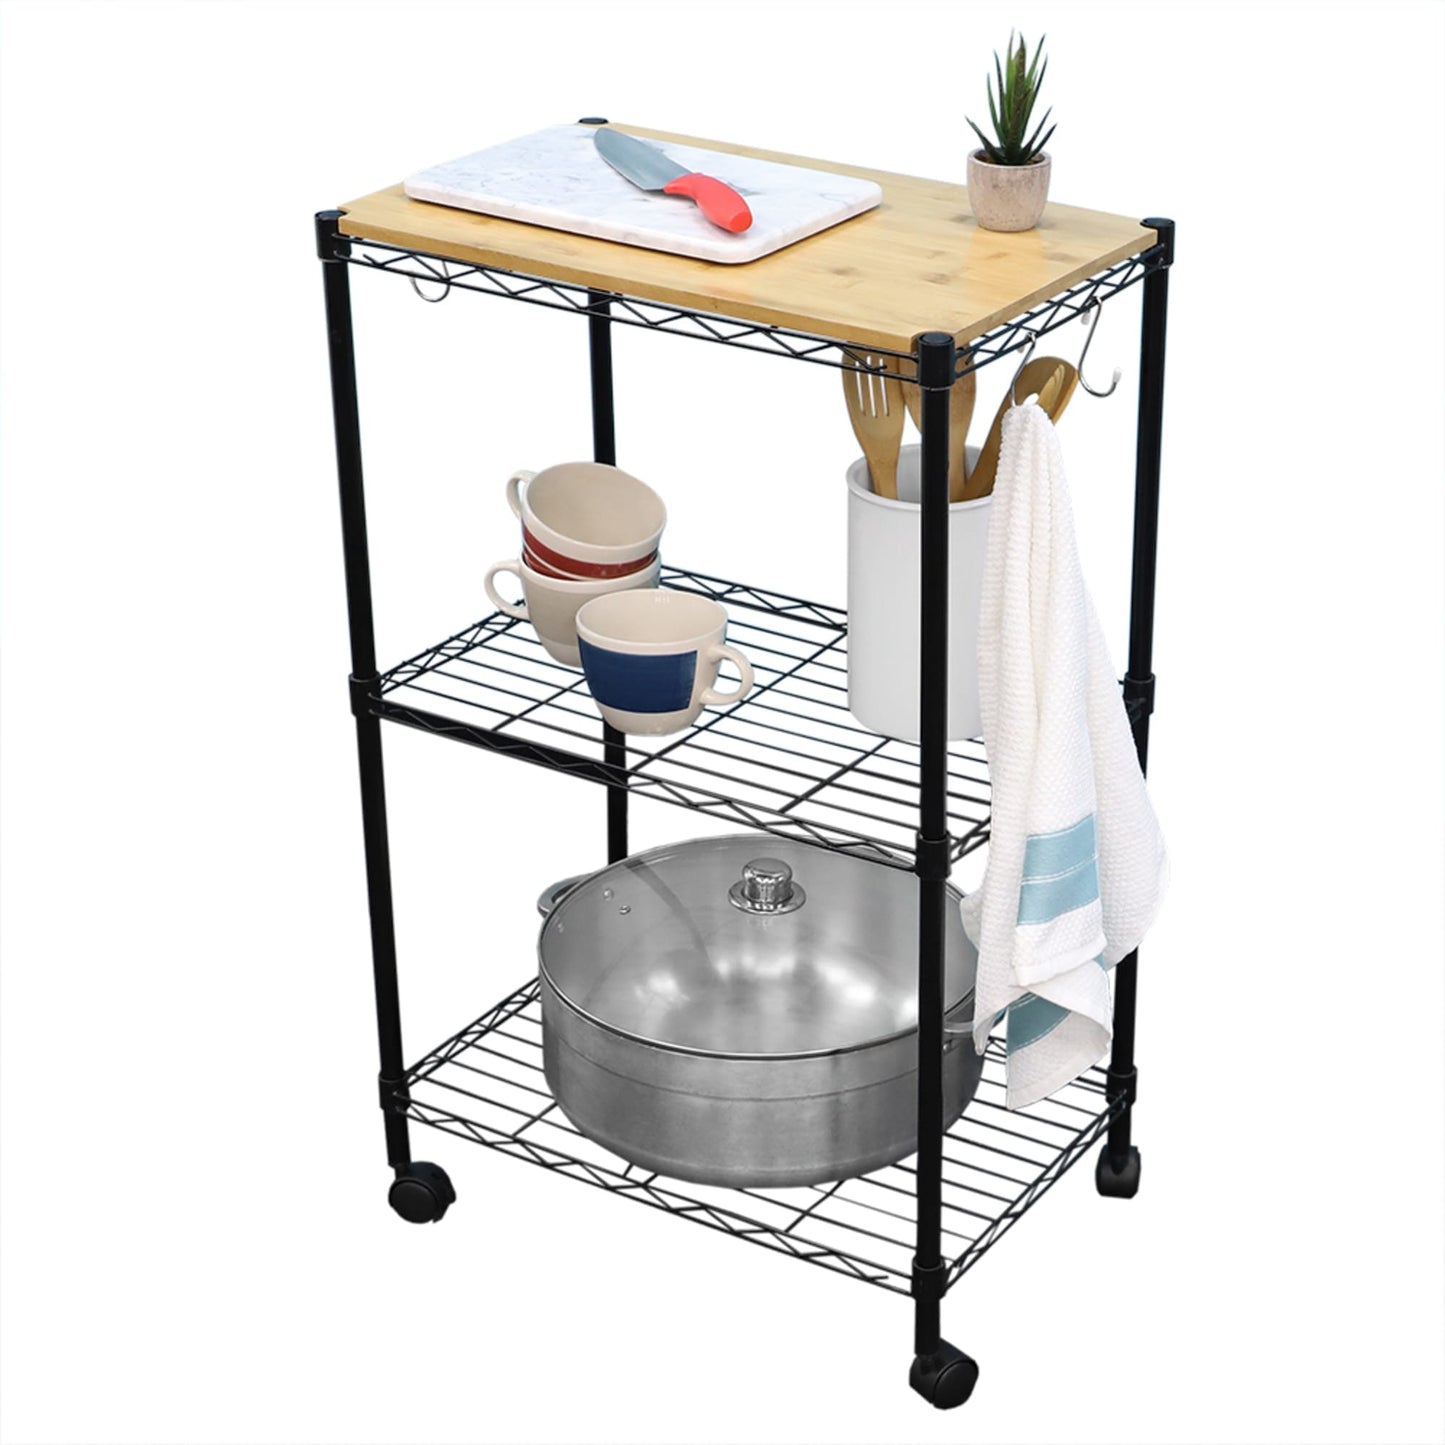 3 Tier MDF Top Kitchen Trolley with Hooks